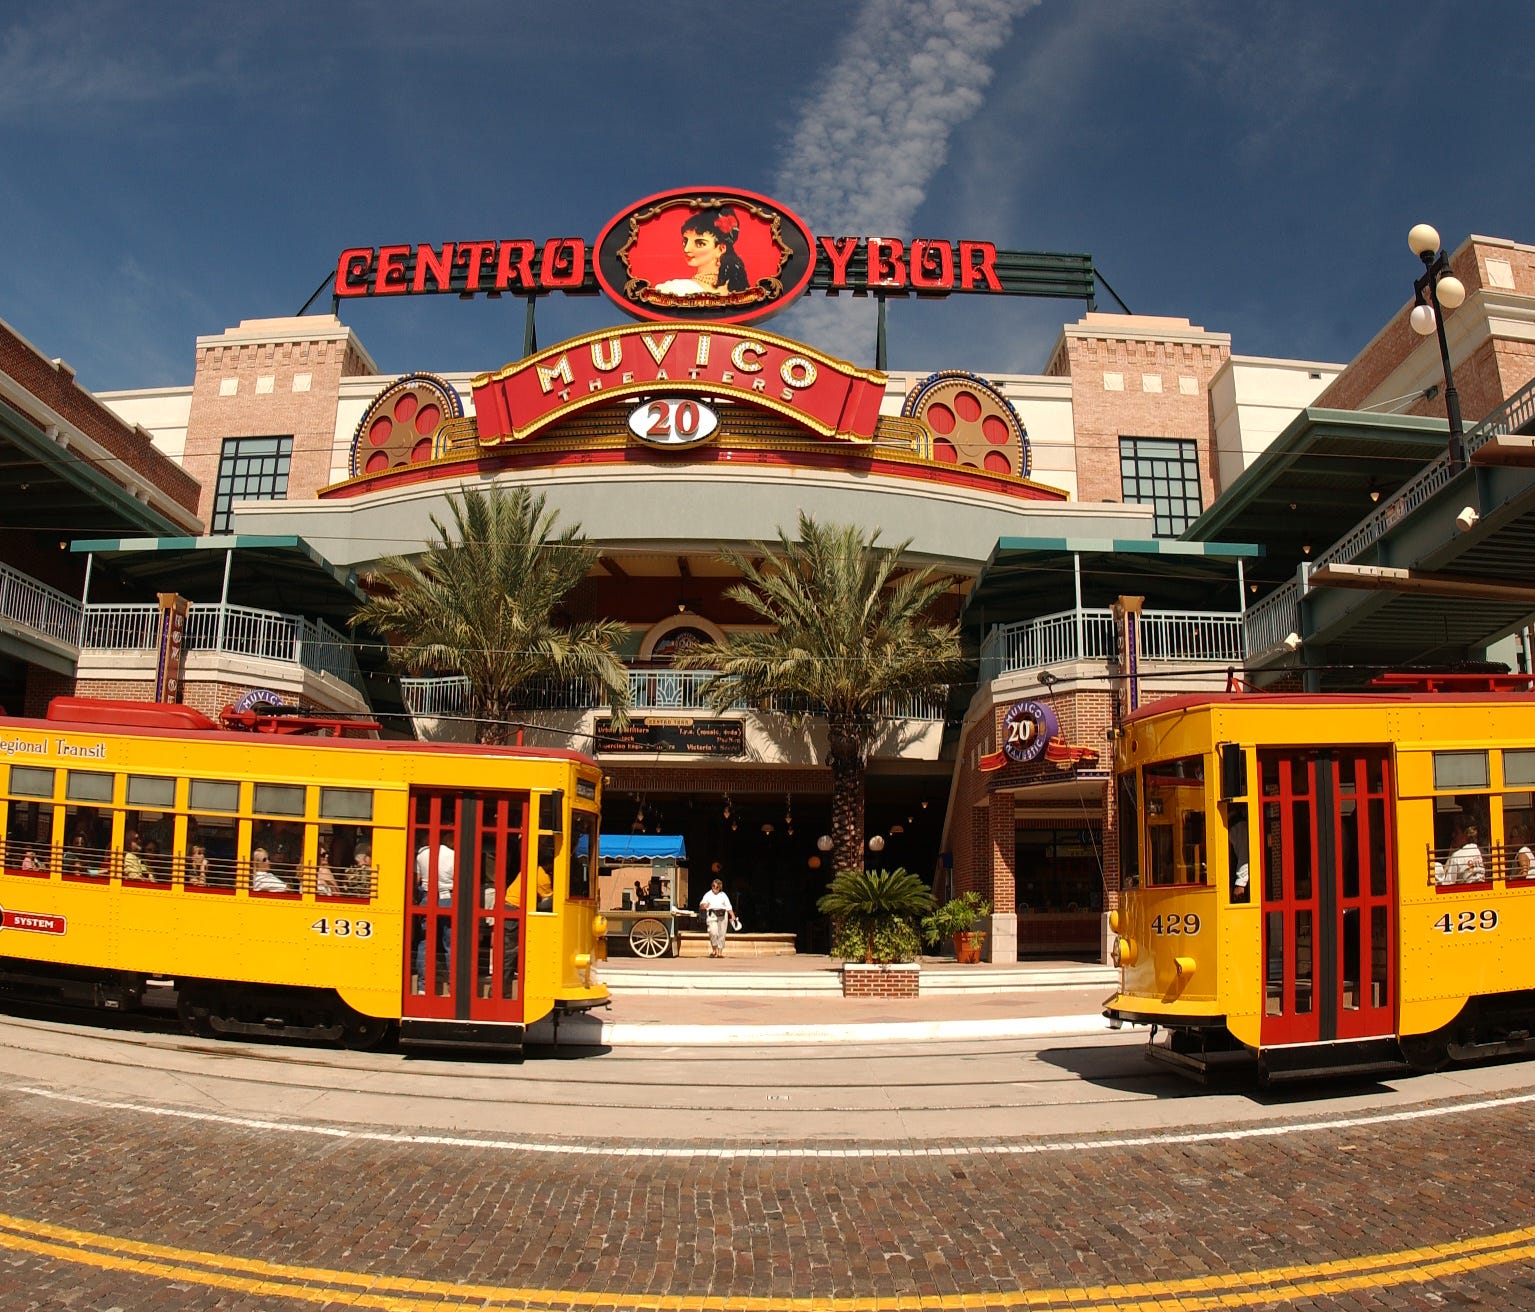 Historic Ybor City was once Tampa's center of cigar industry. Now it's a lively district with restaurants and shops.